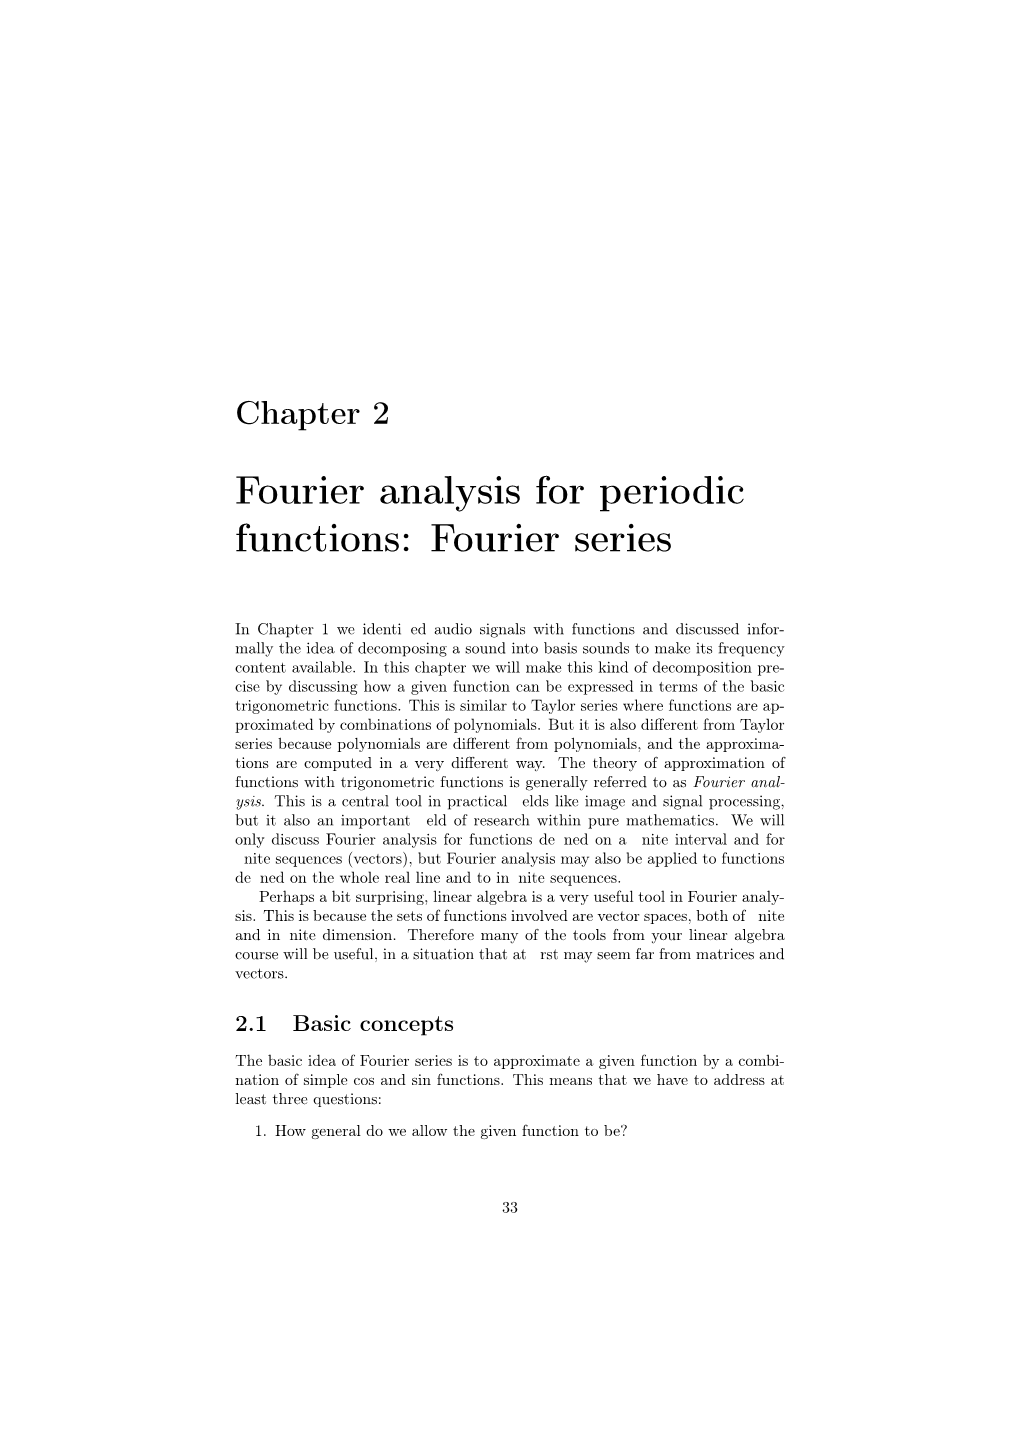 Fourier Analysis for Periodic Functions: Fourier Series